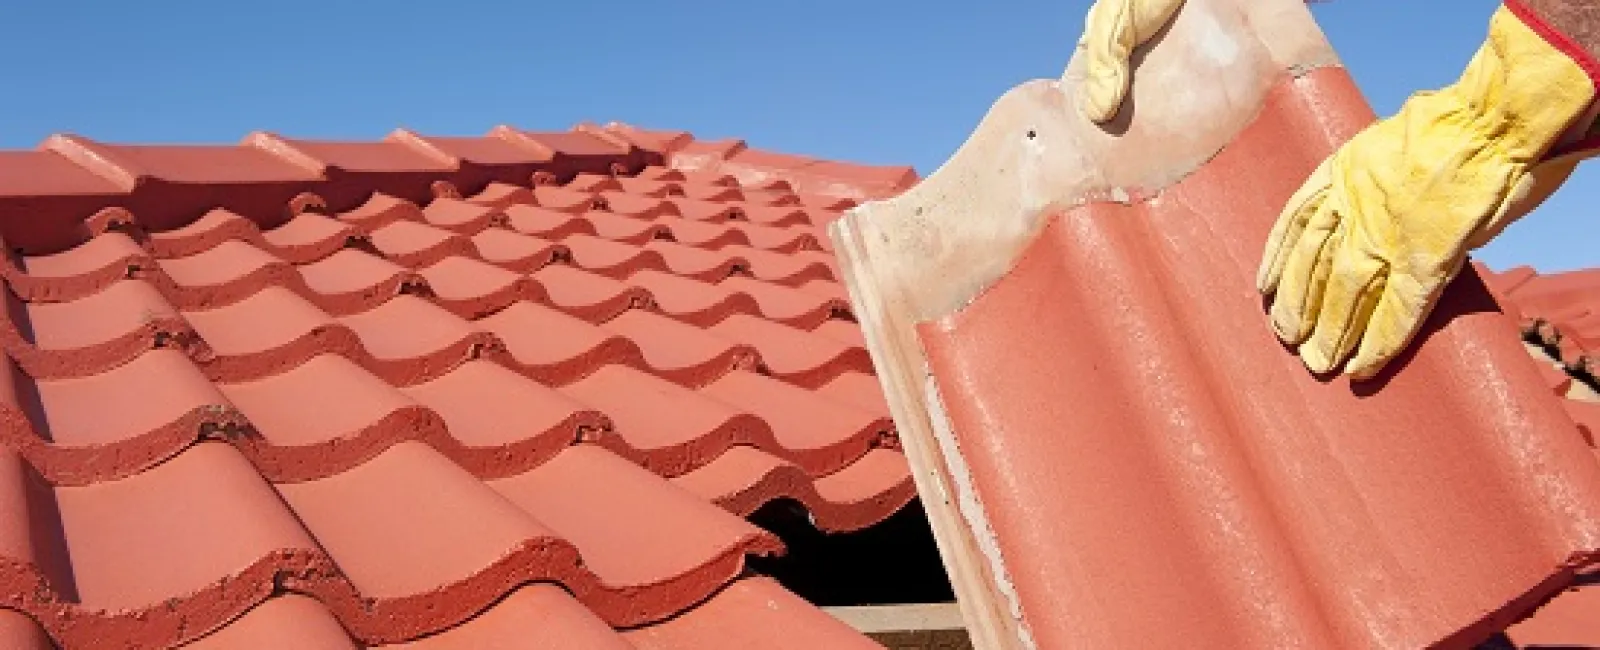 Roof Repair or Roof Replacement: Know What Your Roof Needs